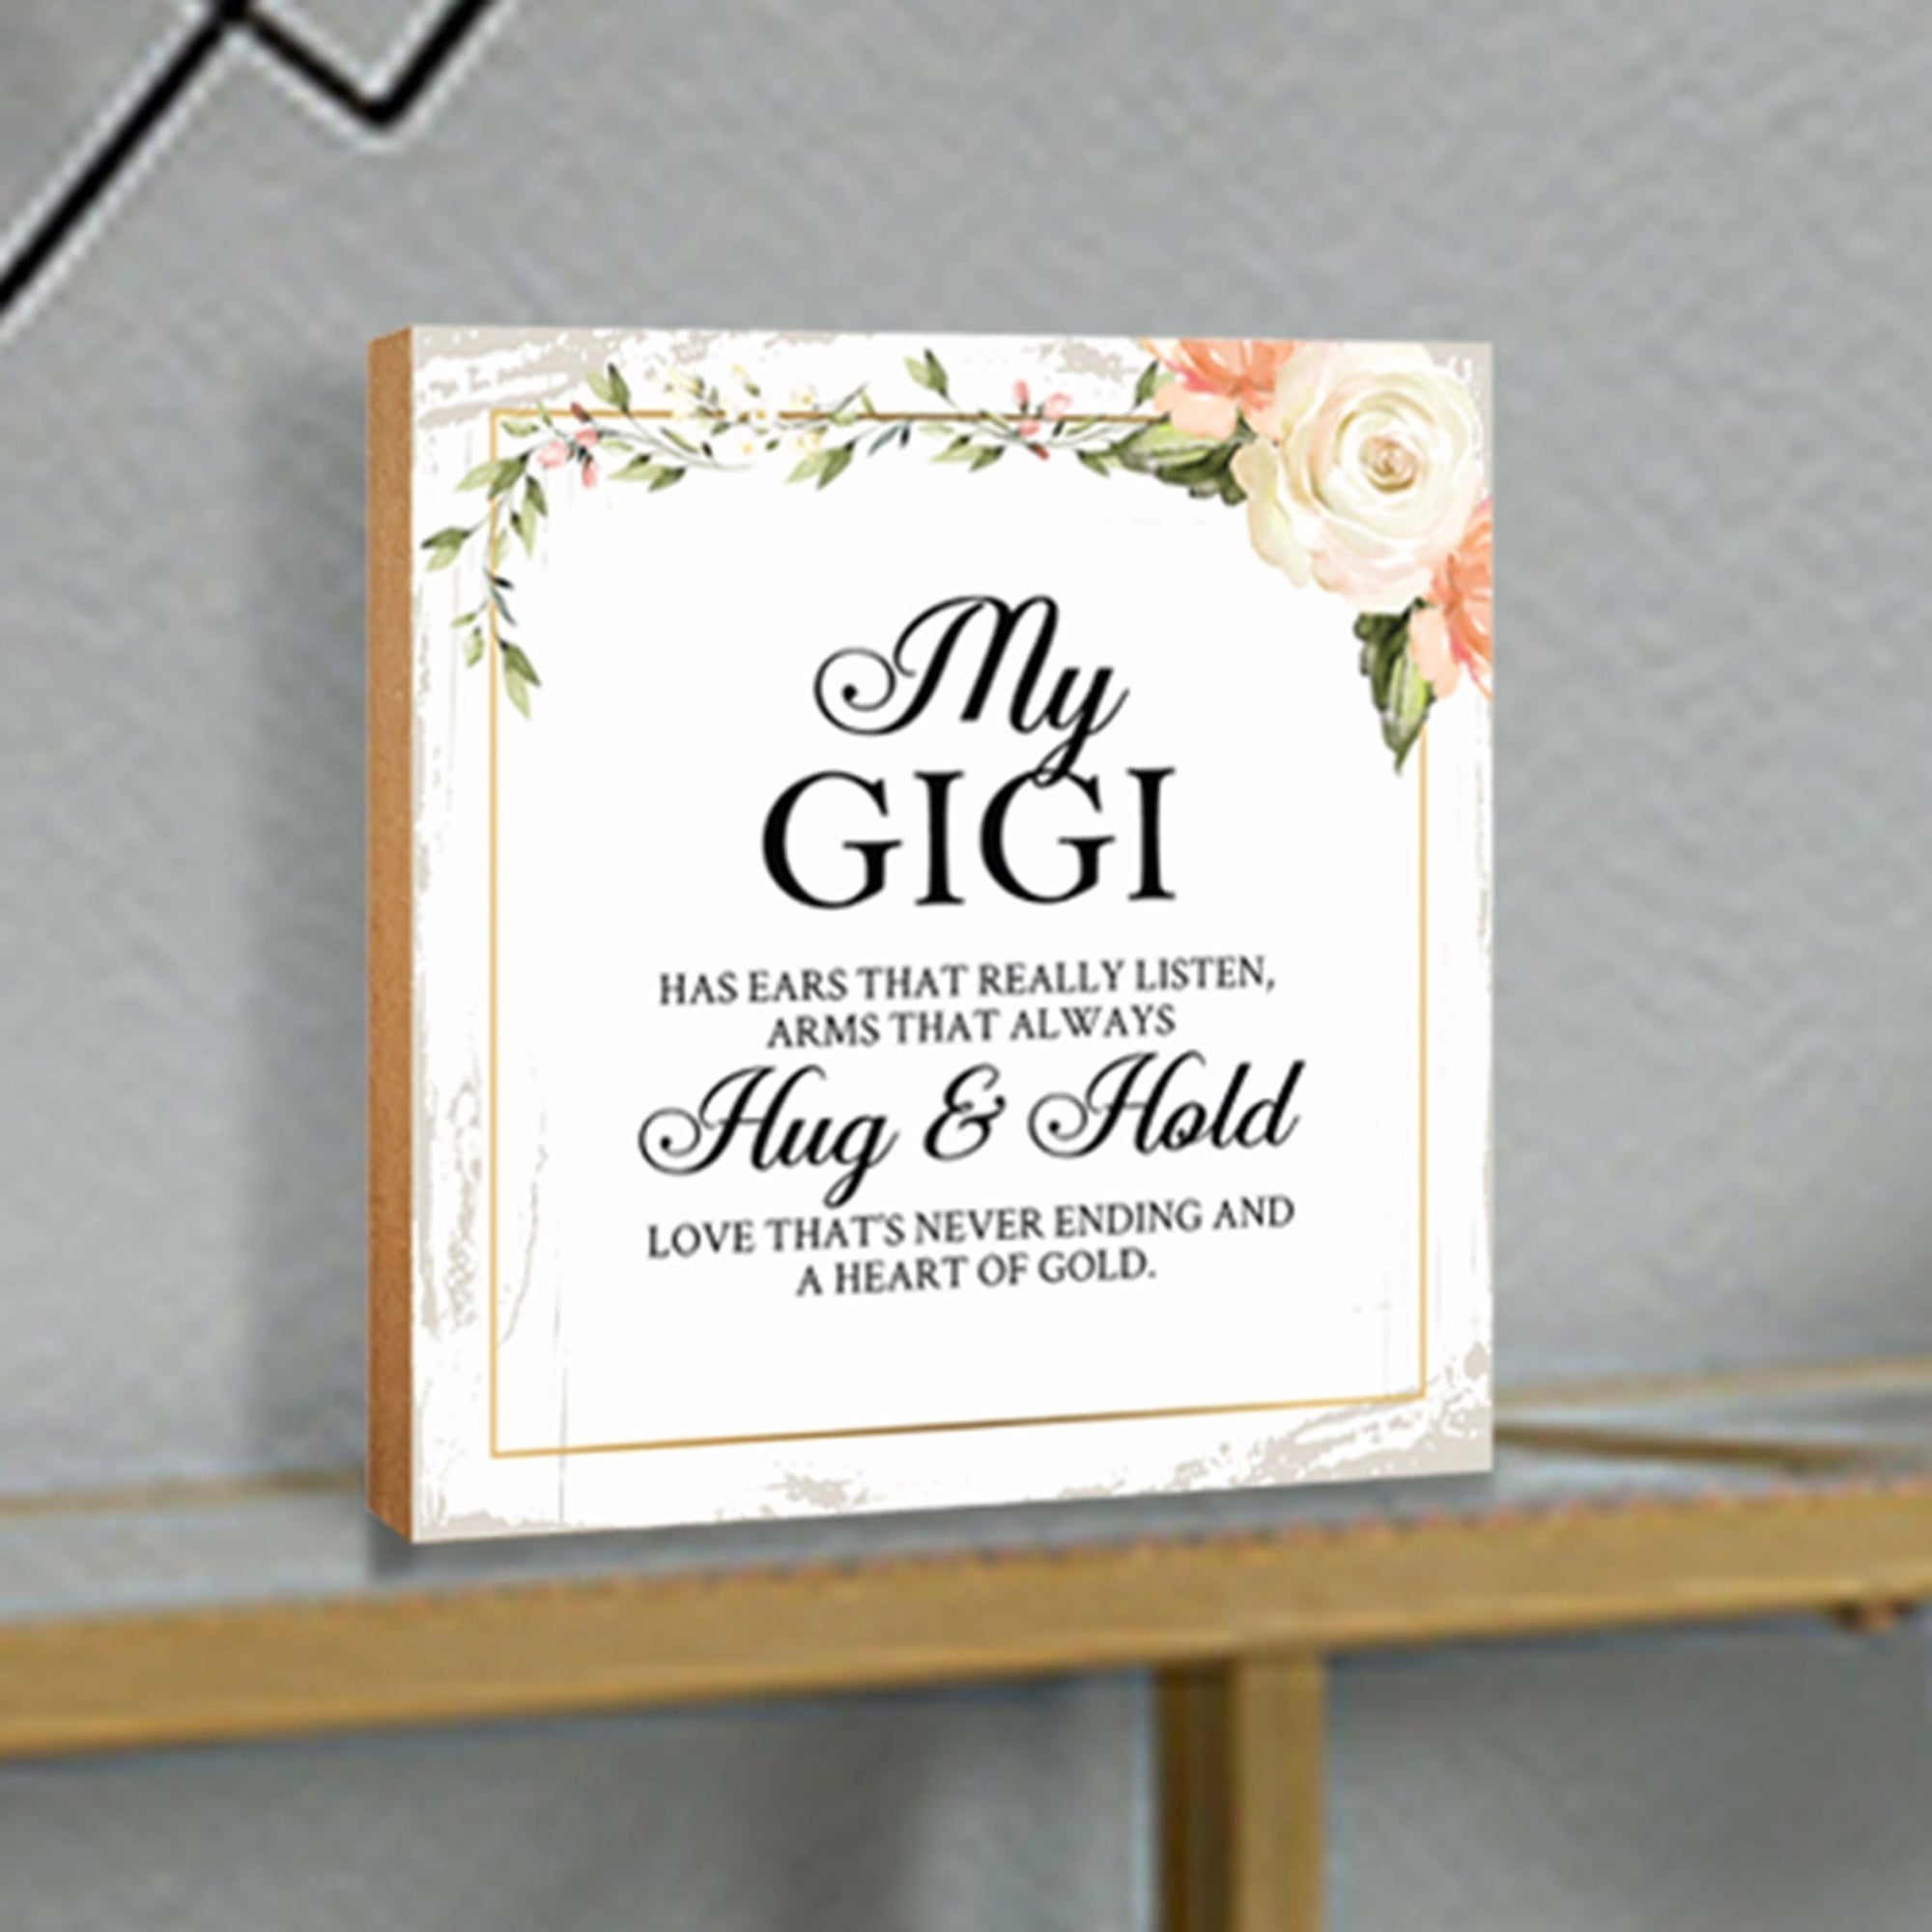 Gigi Has Ears Floral 6x6 Inches Wood Family Art Sign Tabletop and Shelving For Home Décor - LifeSong Milestones